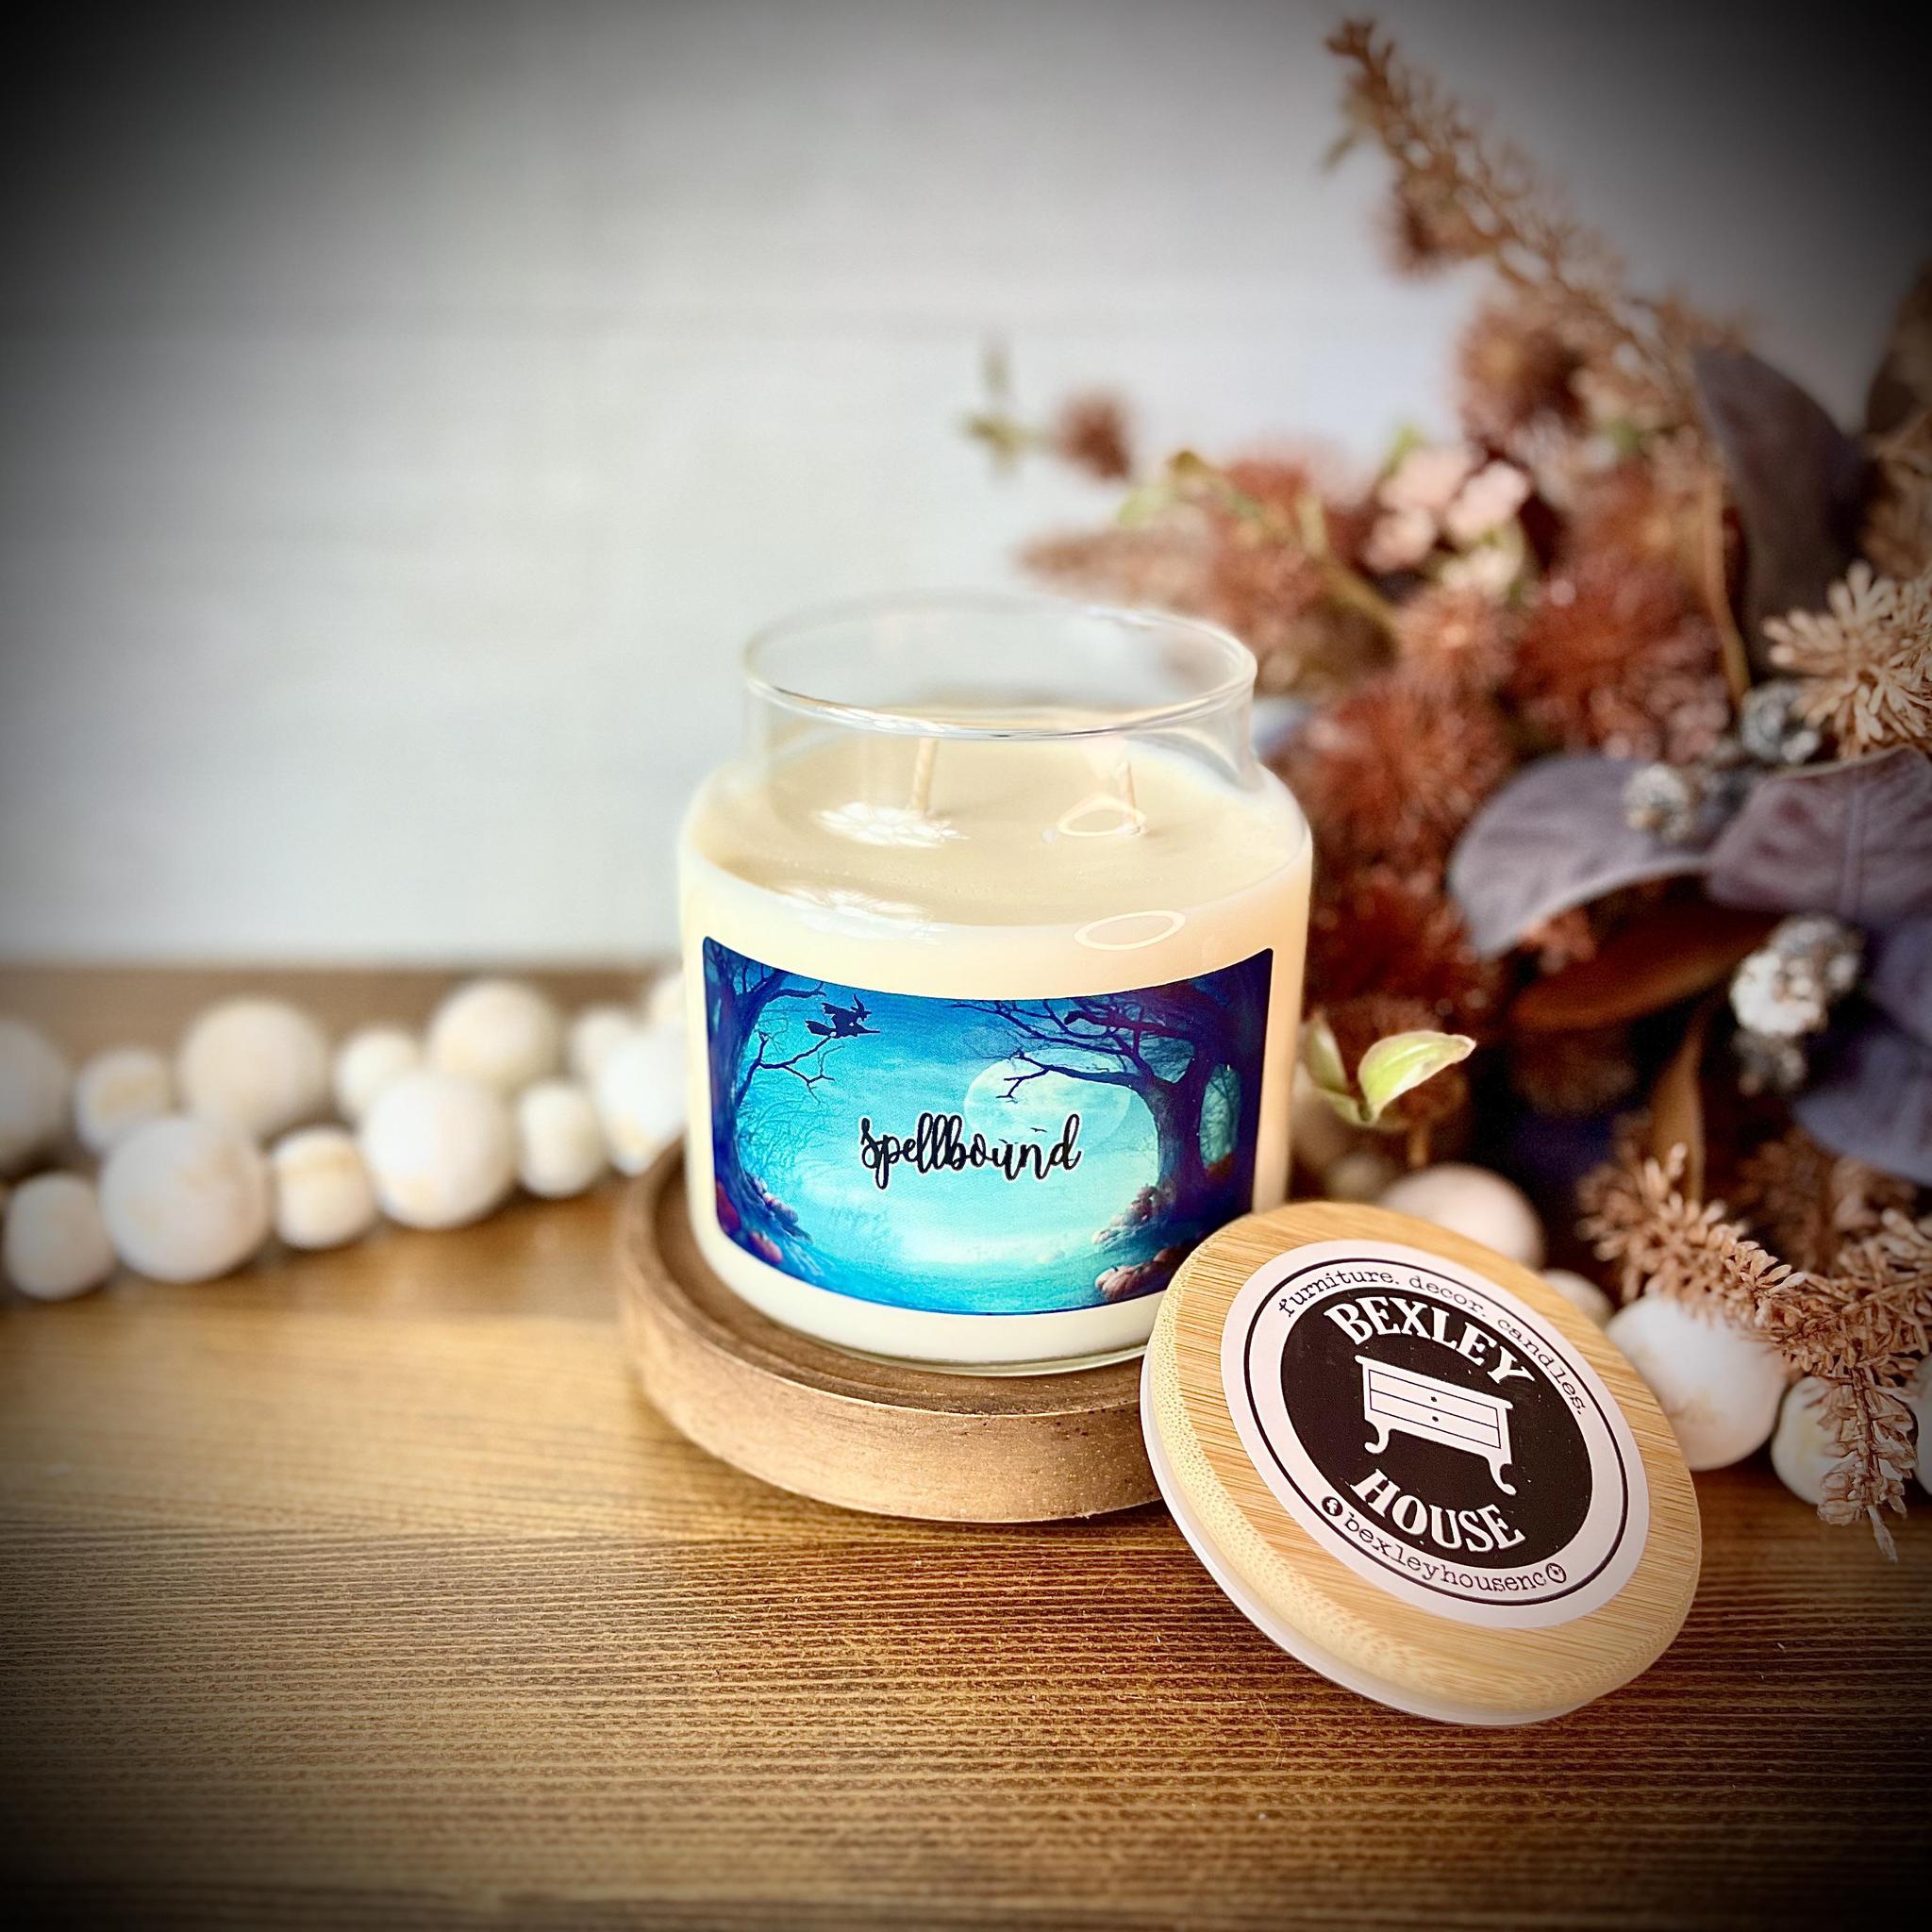 Bexley House 16oz Apothecary Candle - Spellbound